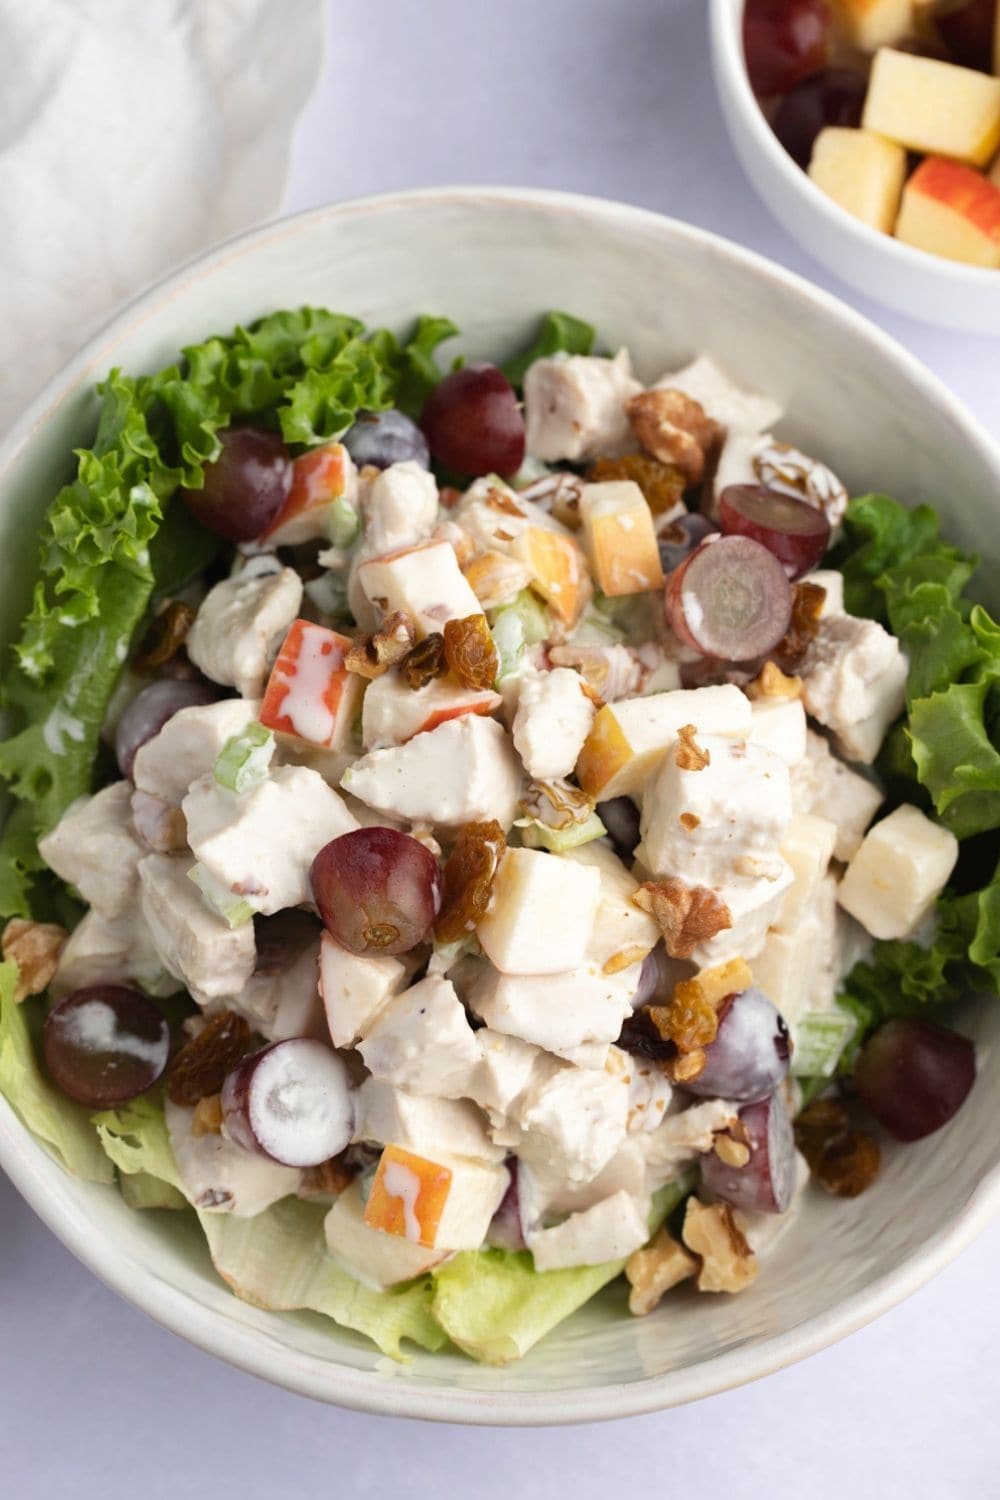 Chicken Waldorf salad mix with apples, grapes, raisins, walnuts and lettuce served on a bowl